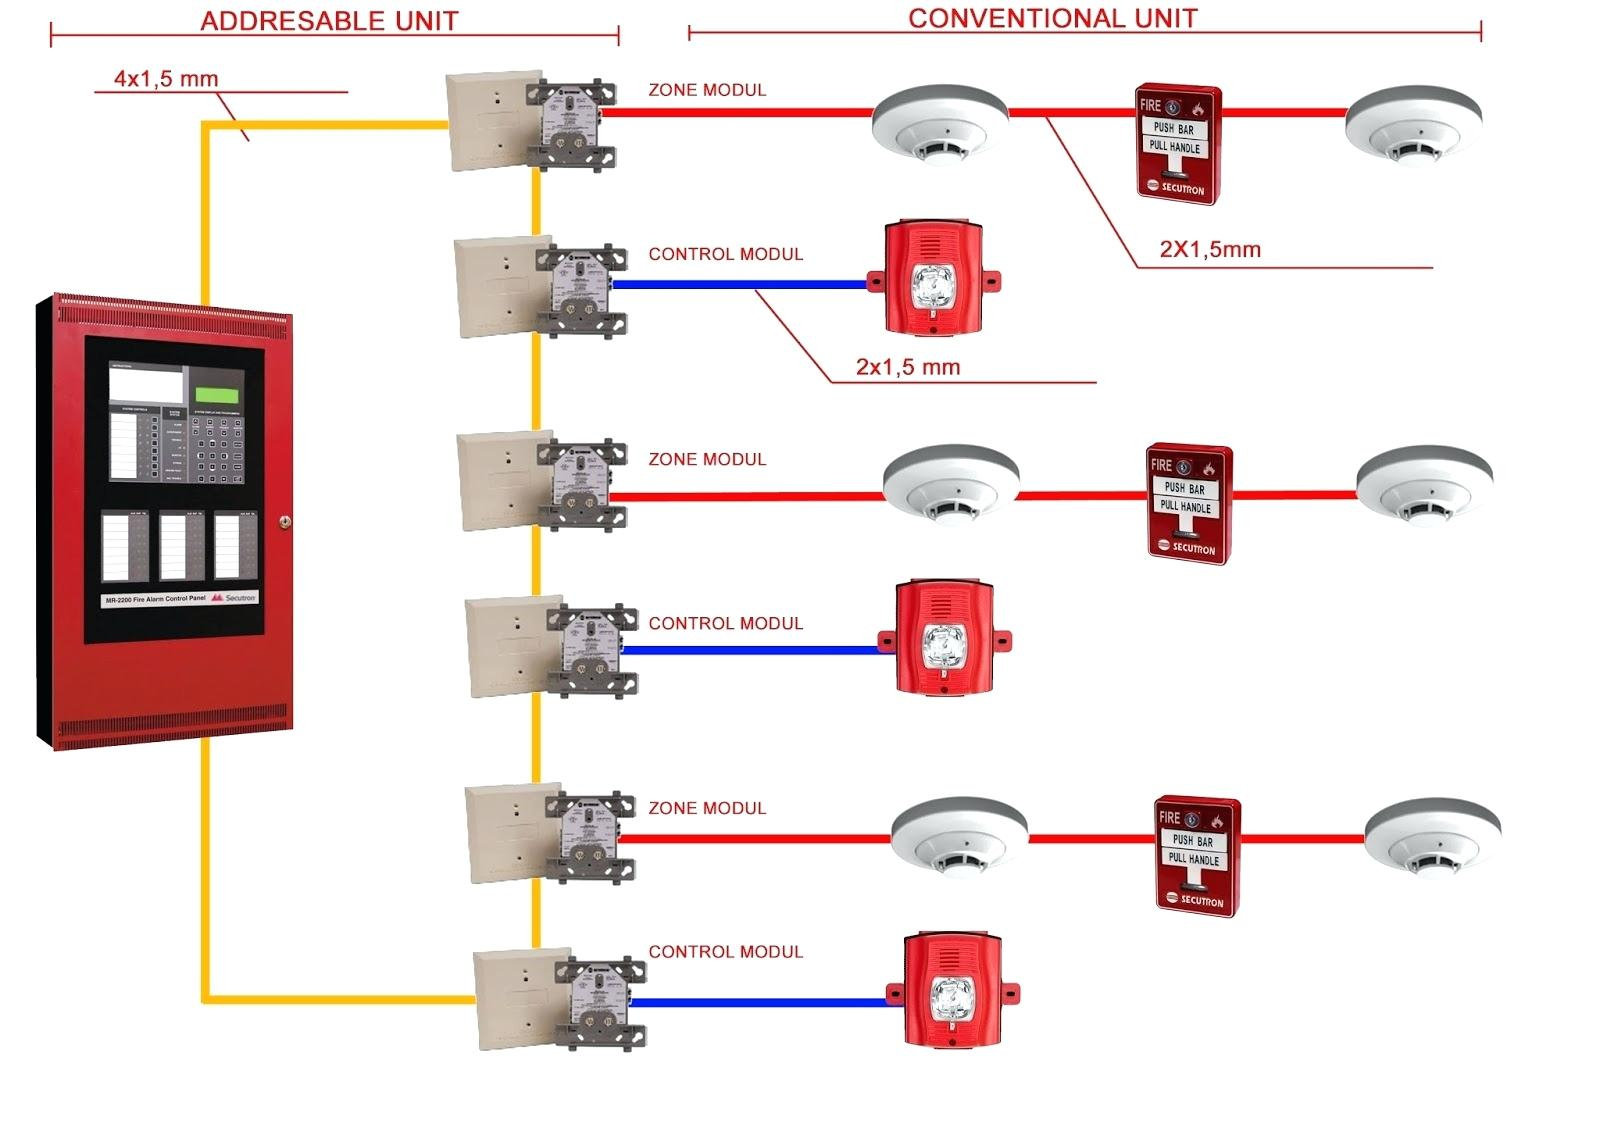 Fire Alarm Wiring Diagram Schematic from www.bengalss.com